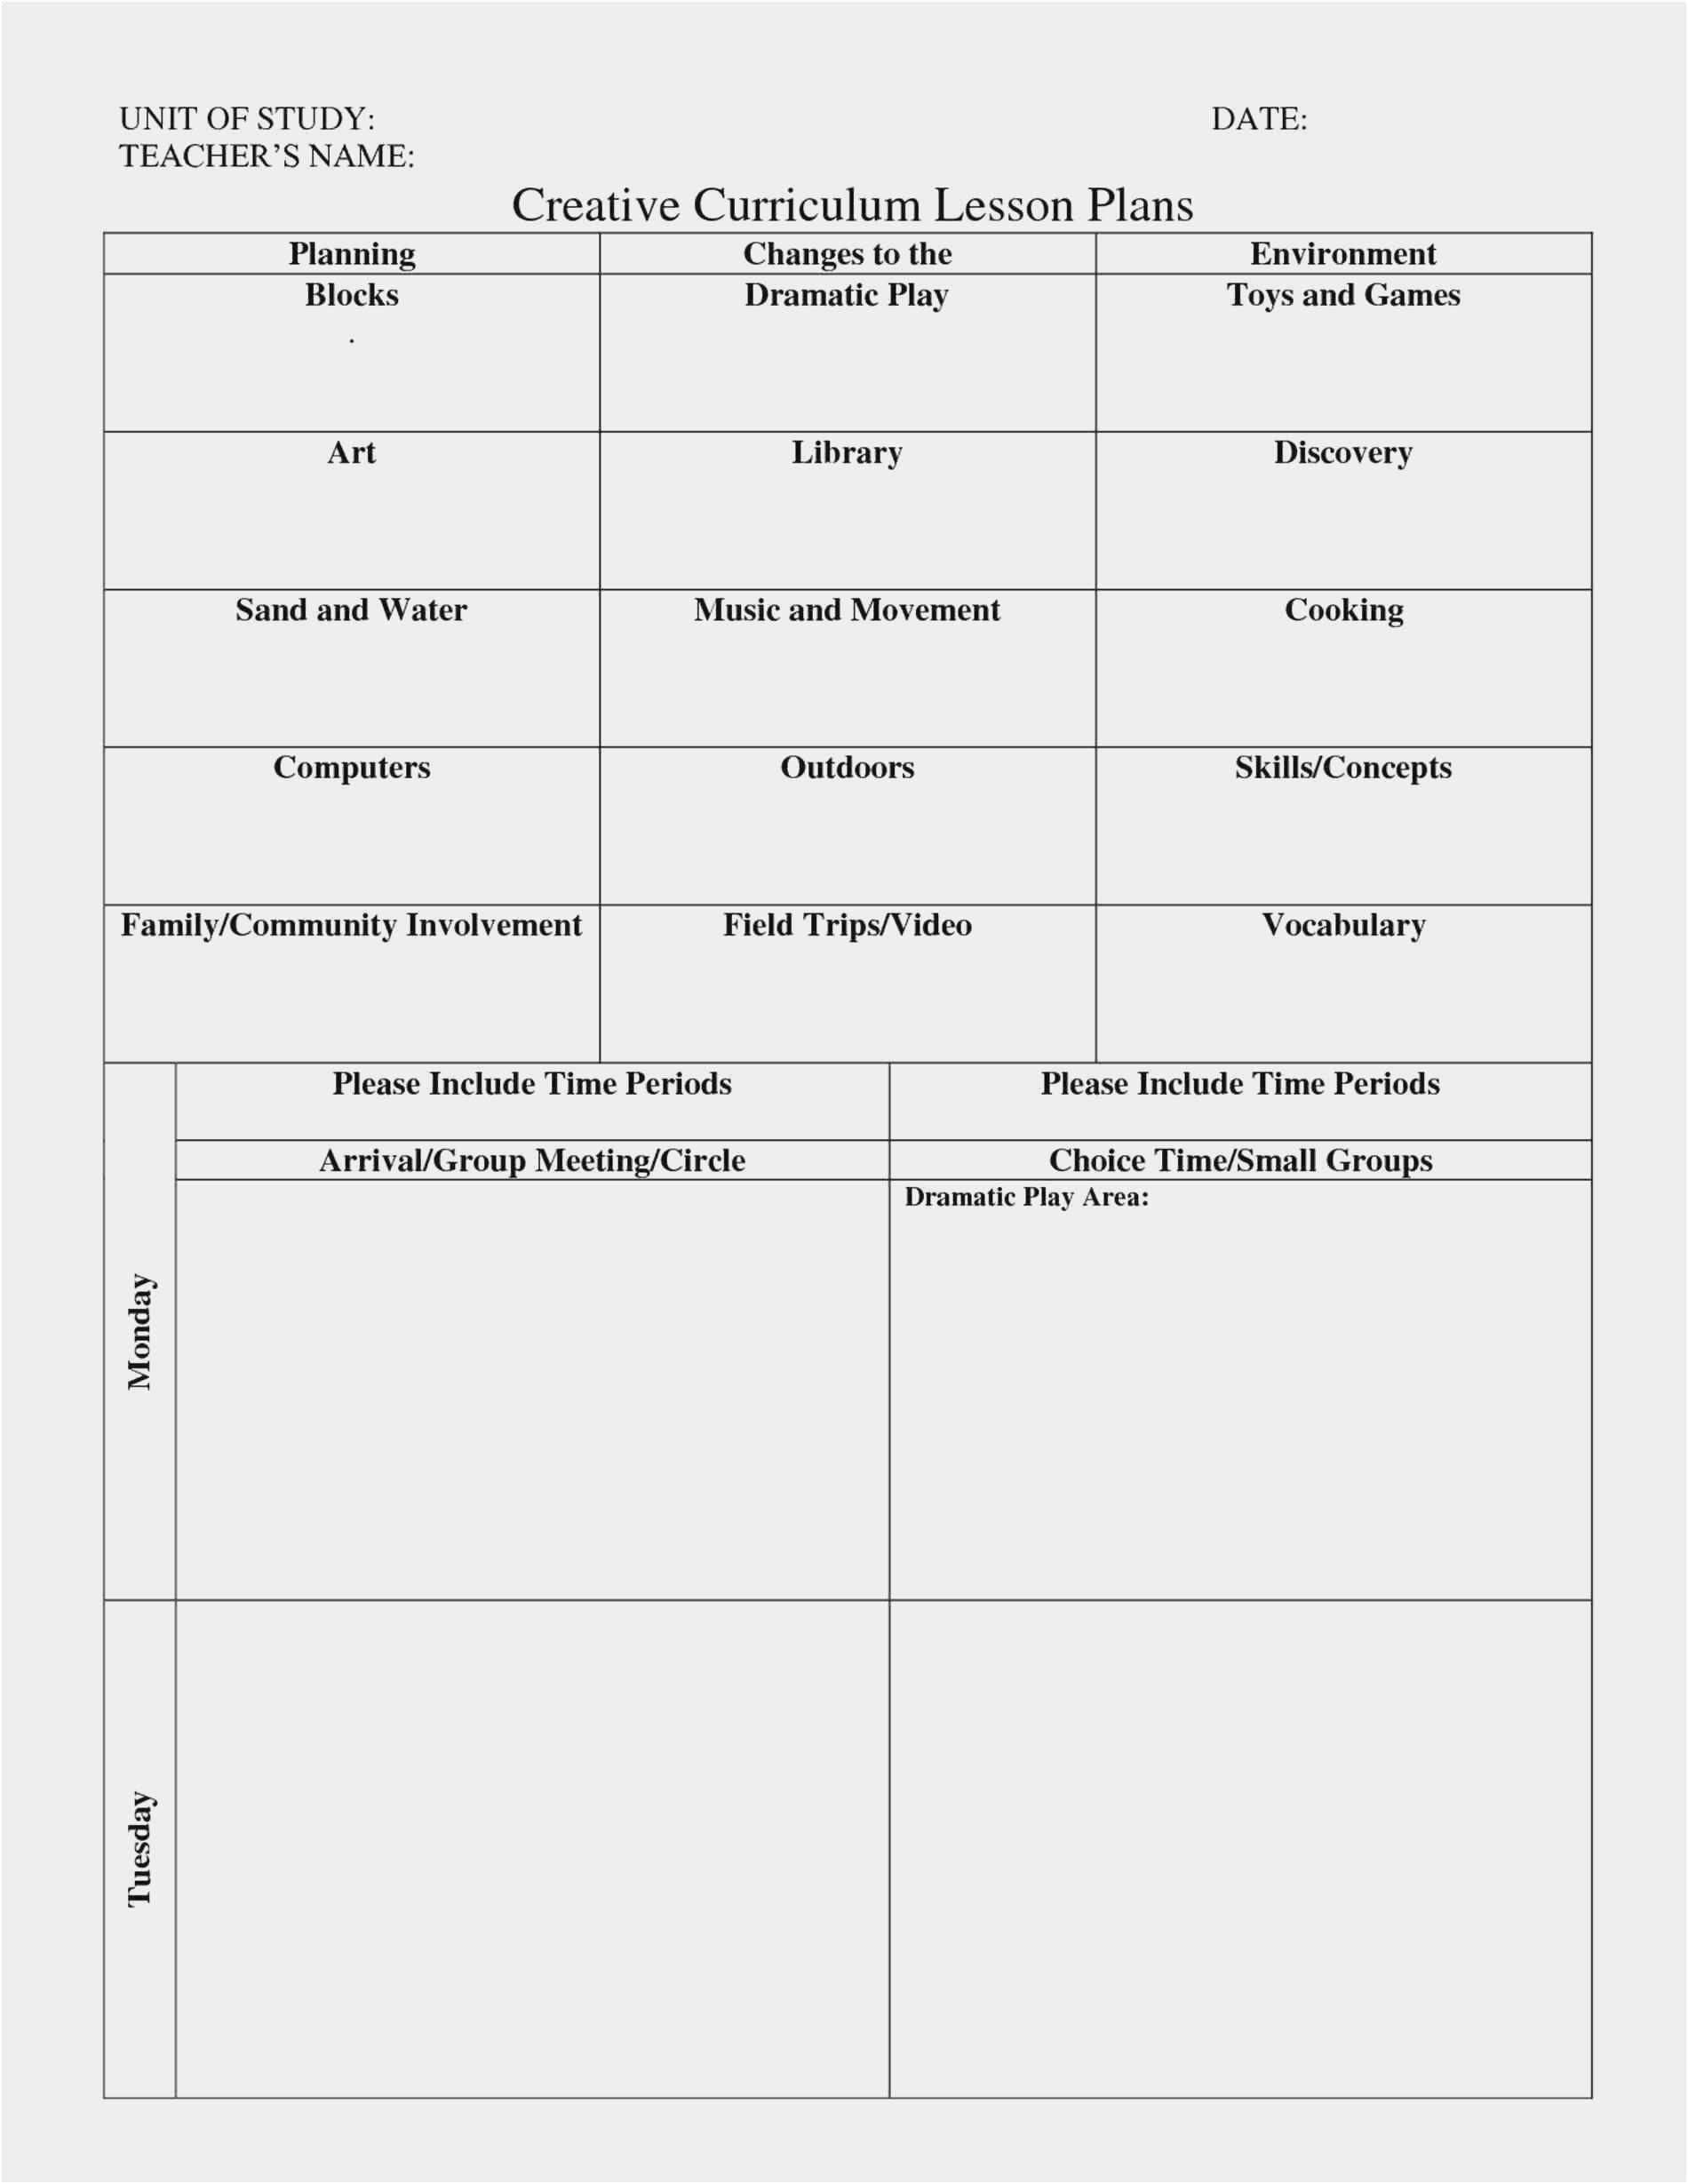 Edtpa Lesson Plan Template 2019 Free Download 57 Udl Lesson Plan Template Simple